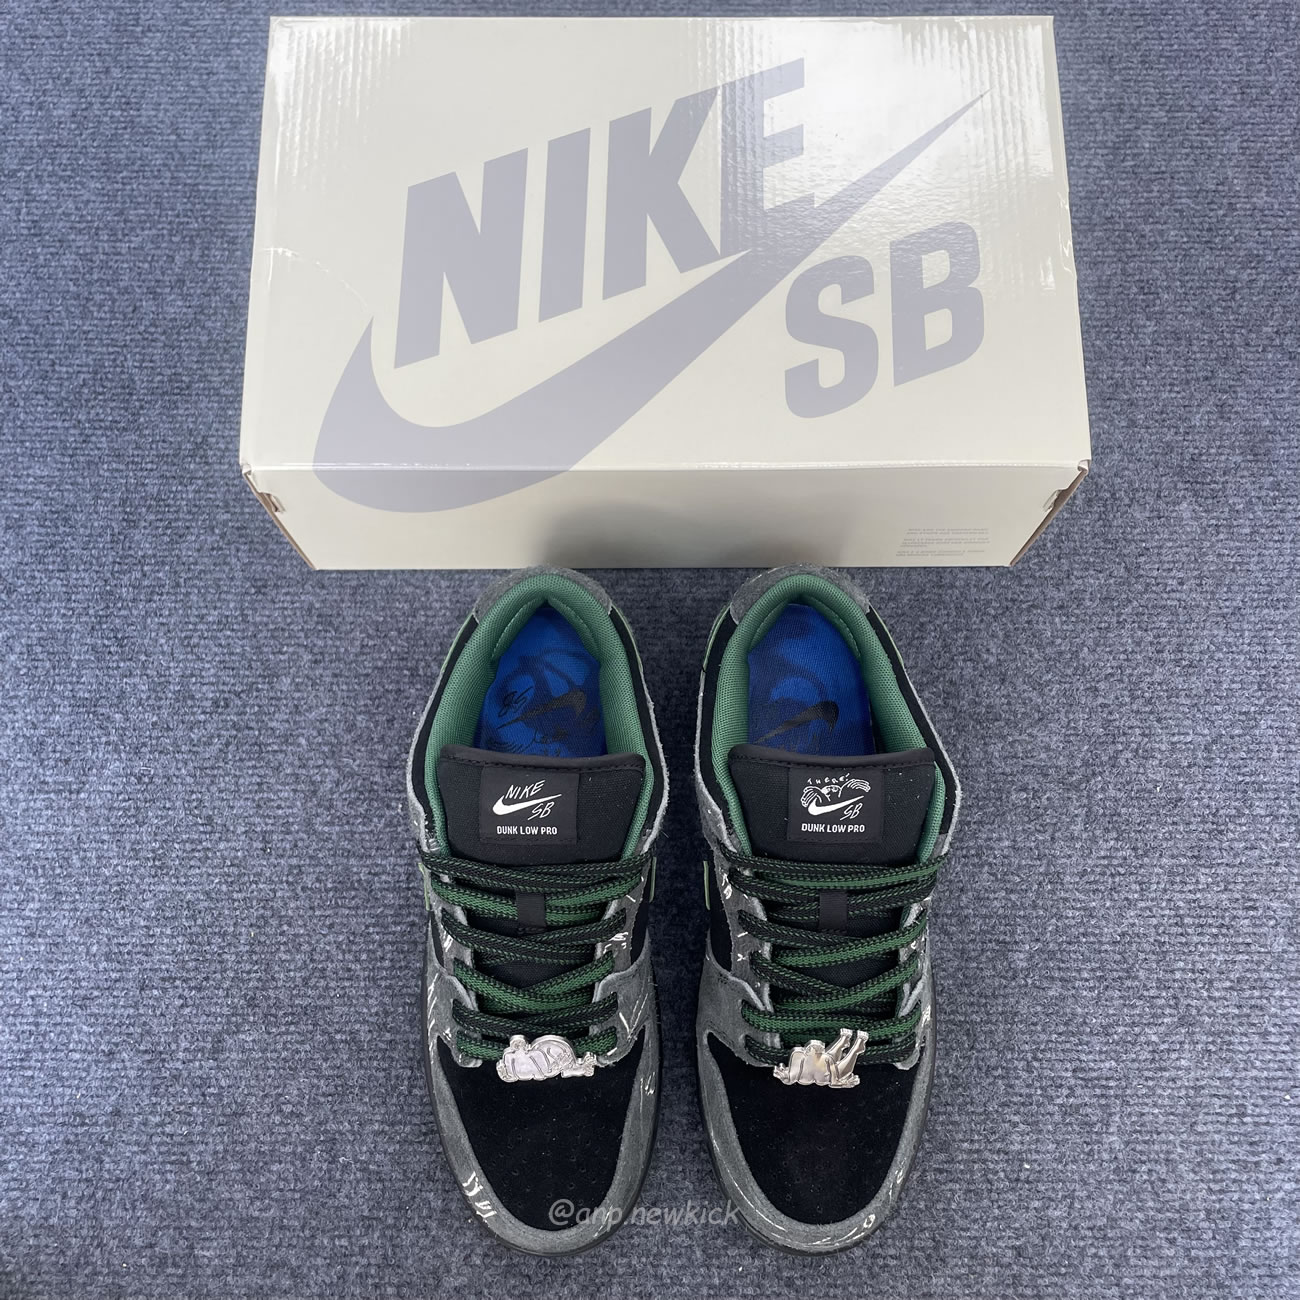 Nike Sb Dunk Low There Skateboards Hf7743 001 (9) - newkick.org